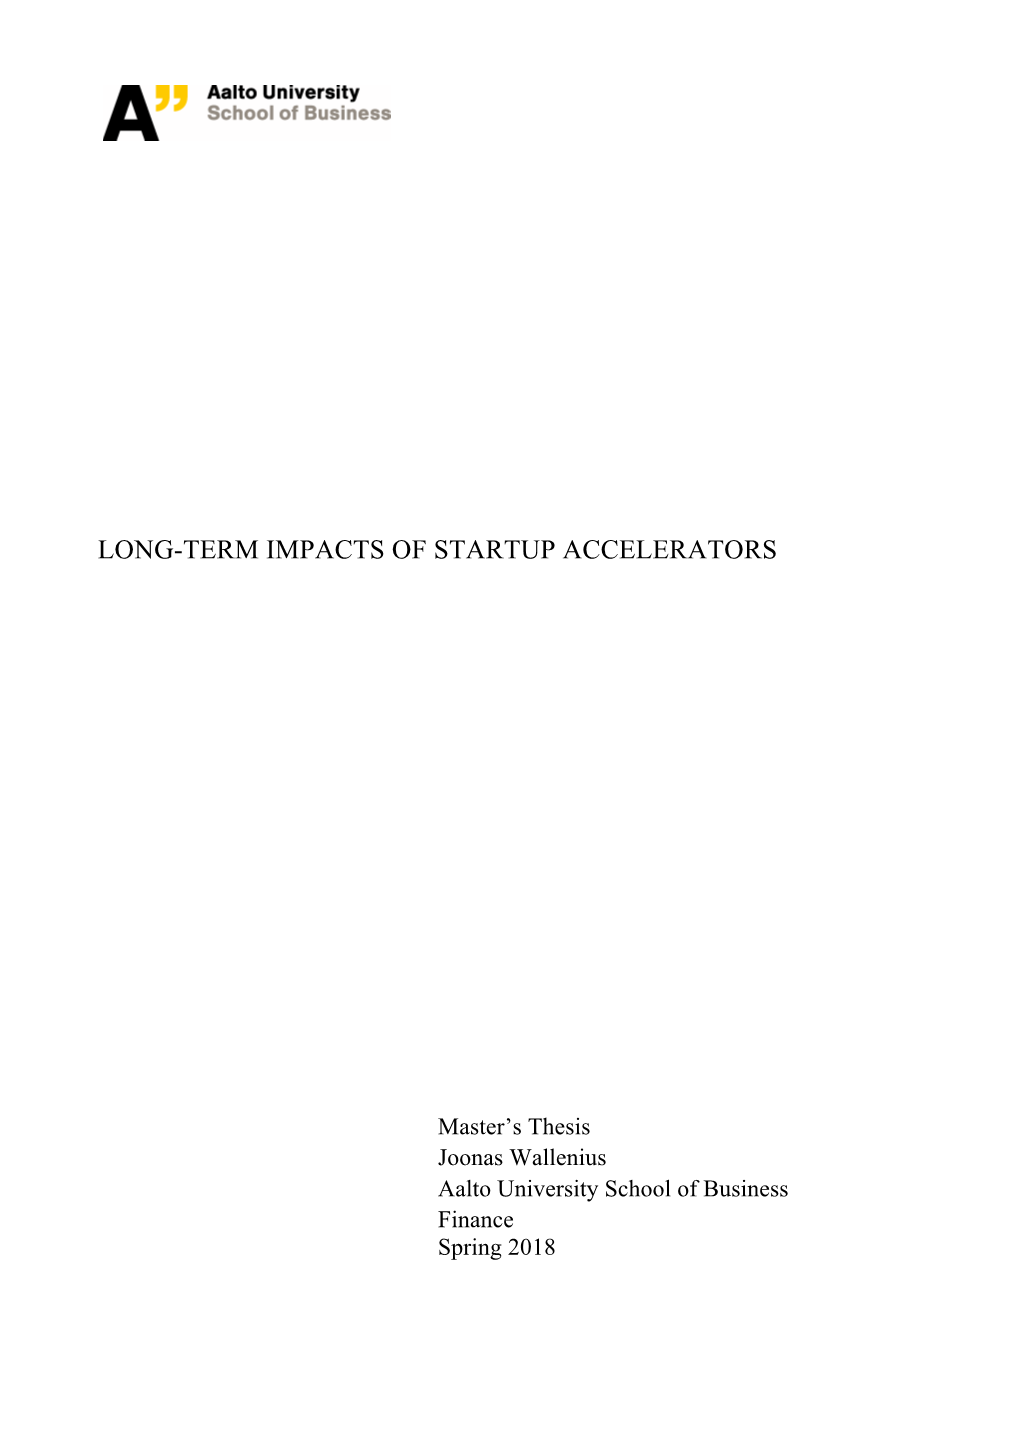 Long-Term Impacts of Startup Accelerators